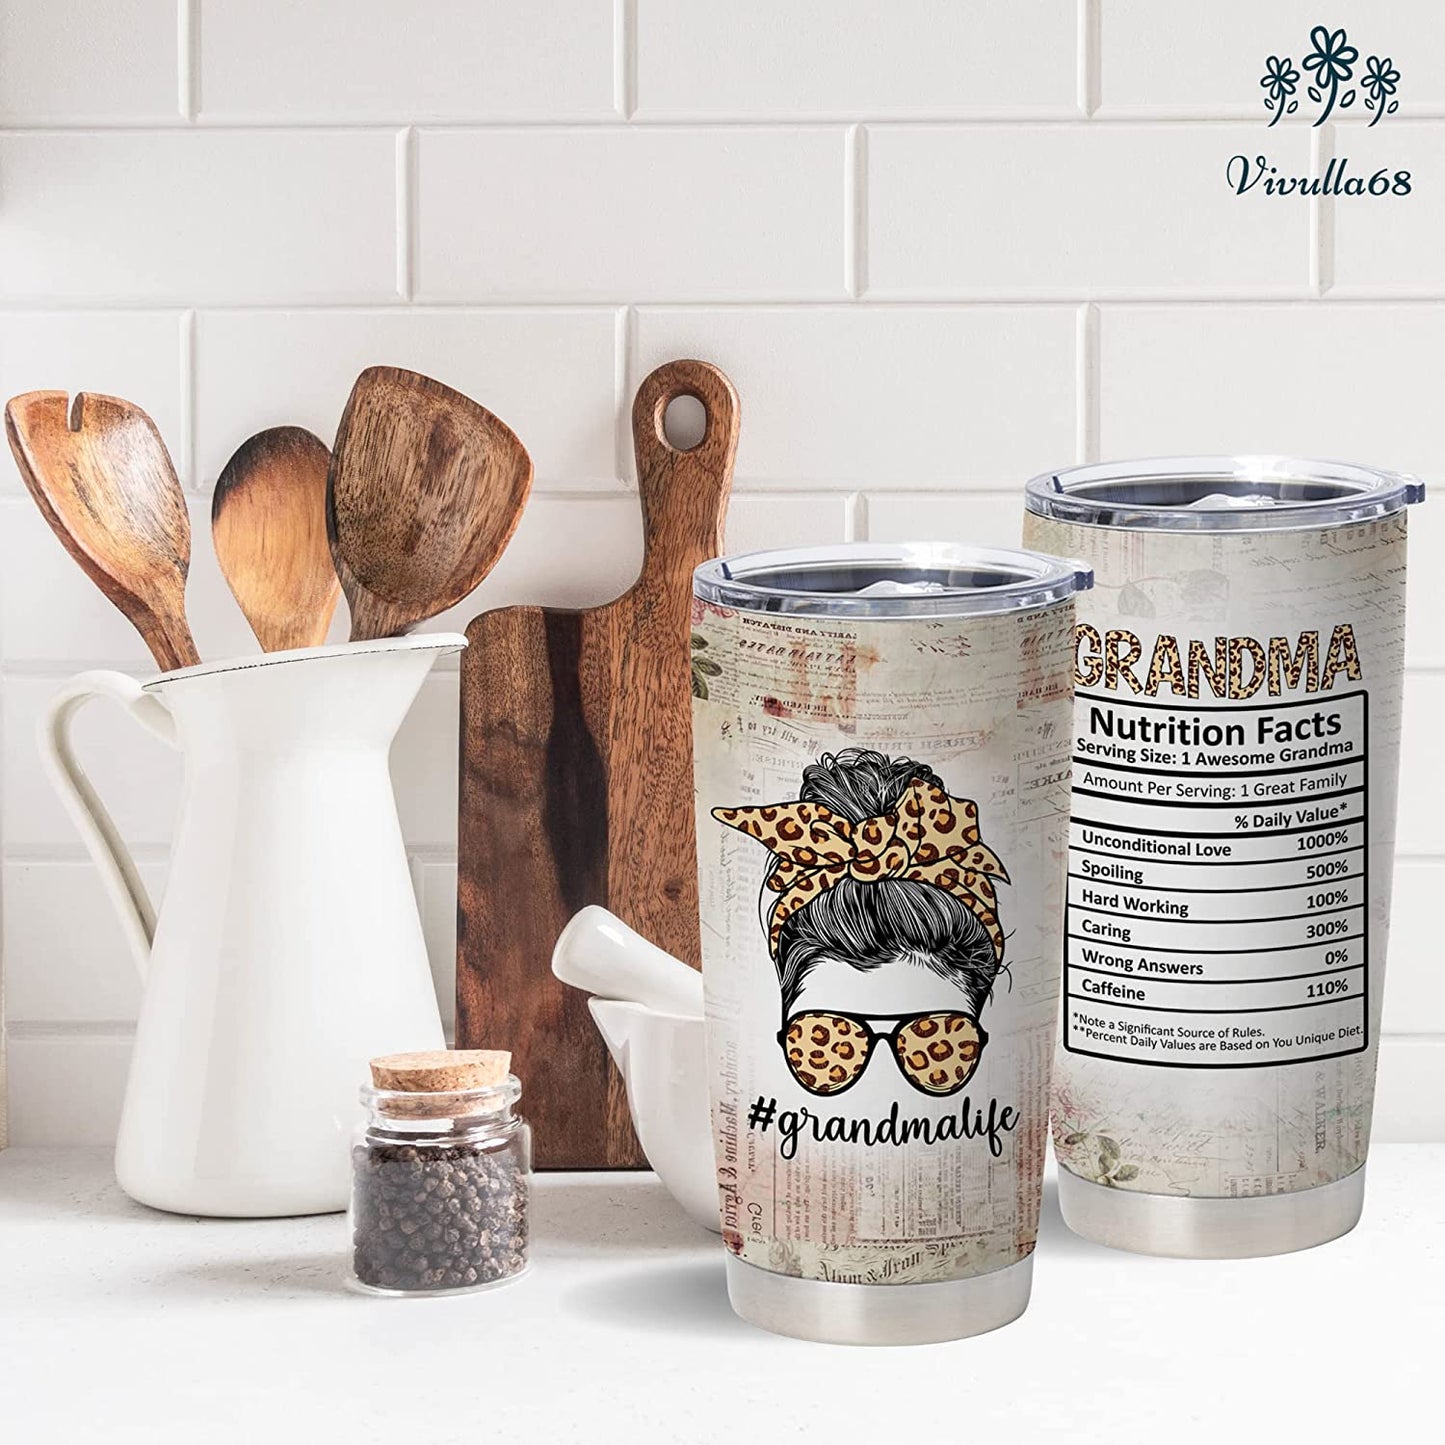 Grandma Gift Ideas, Grandma Birthday Gifts From grandchildren, Mother's Day Gifts For Nana, Gift Ideas For Grandmother, Grandma Travel Tumbler, Grandma Nutritionfact Travel Coffee Mugs 20 Oz